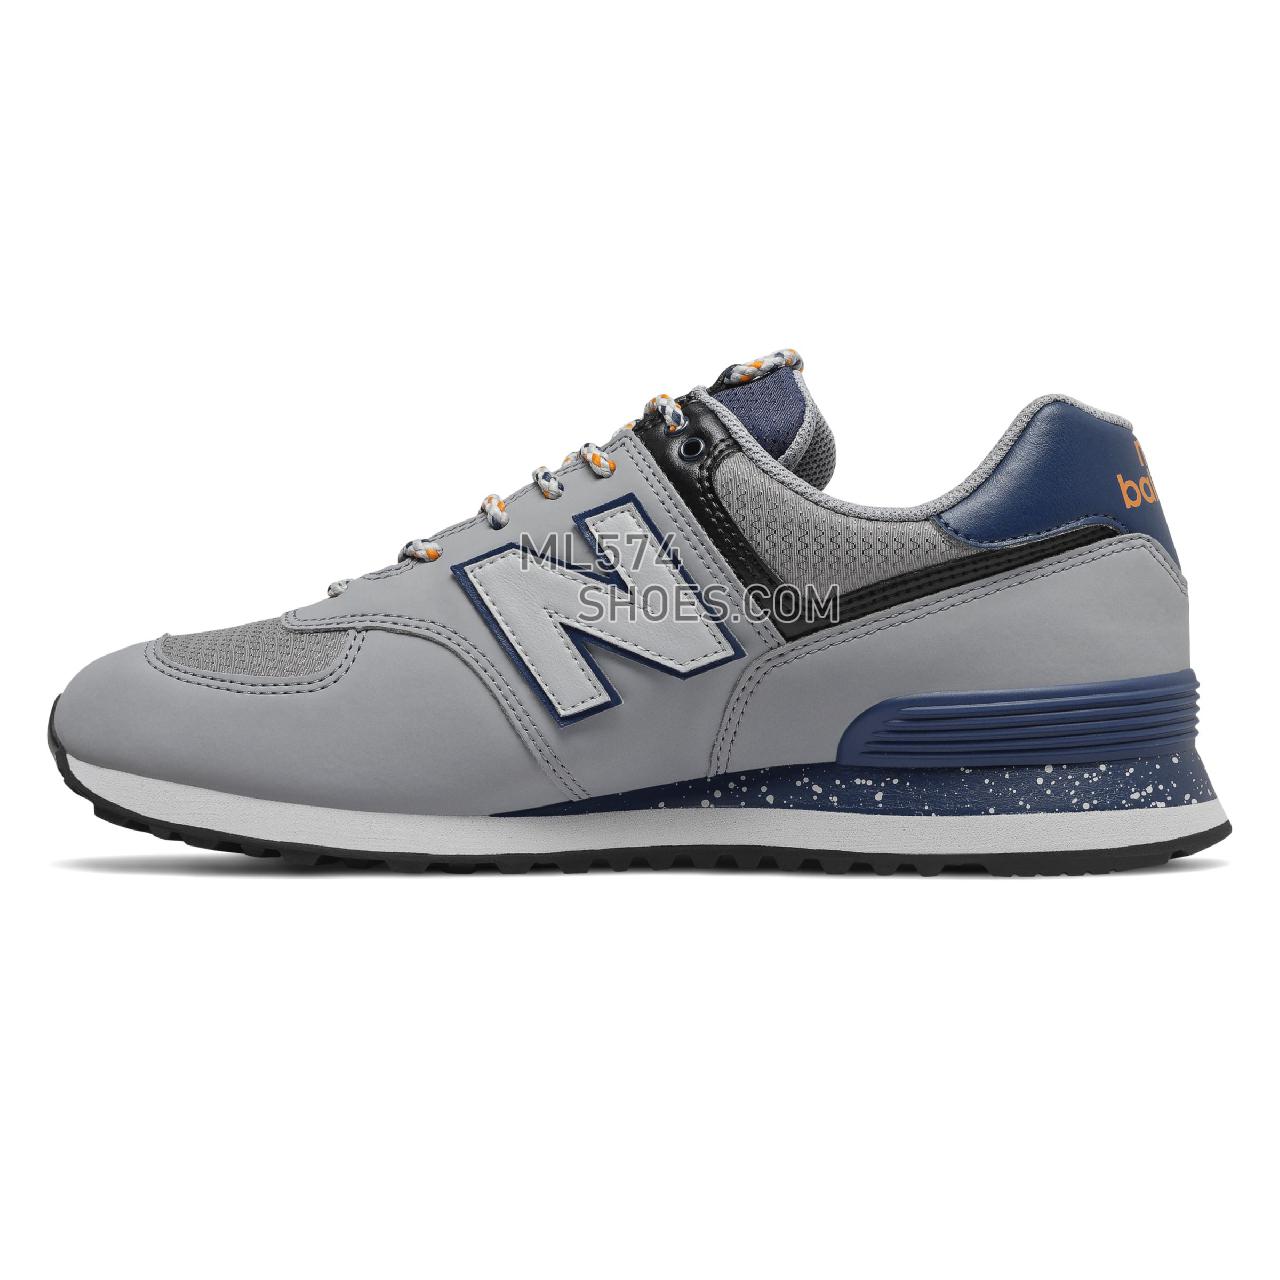 New Balance 574 - Men's Classic Sneakers - Steel with Moroccan Tile - ML574NFJ